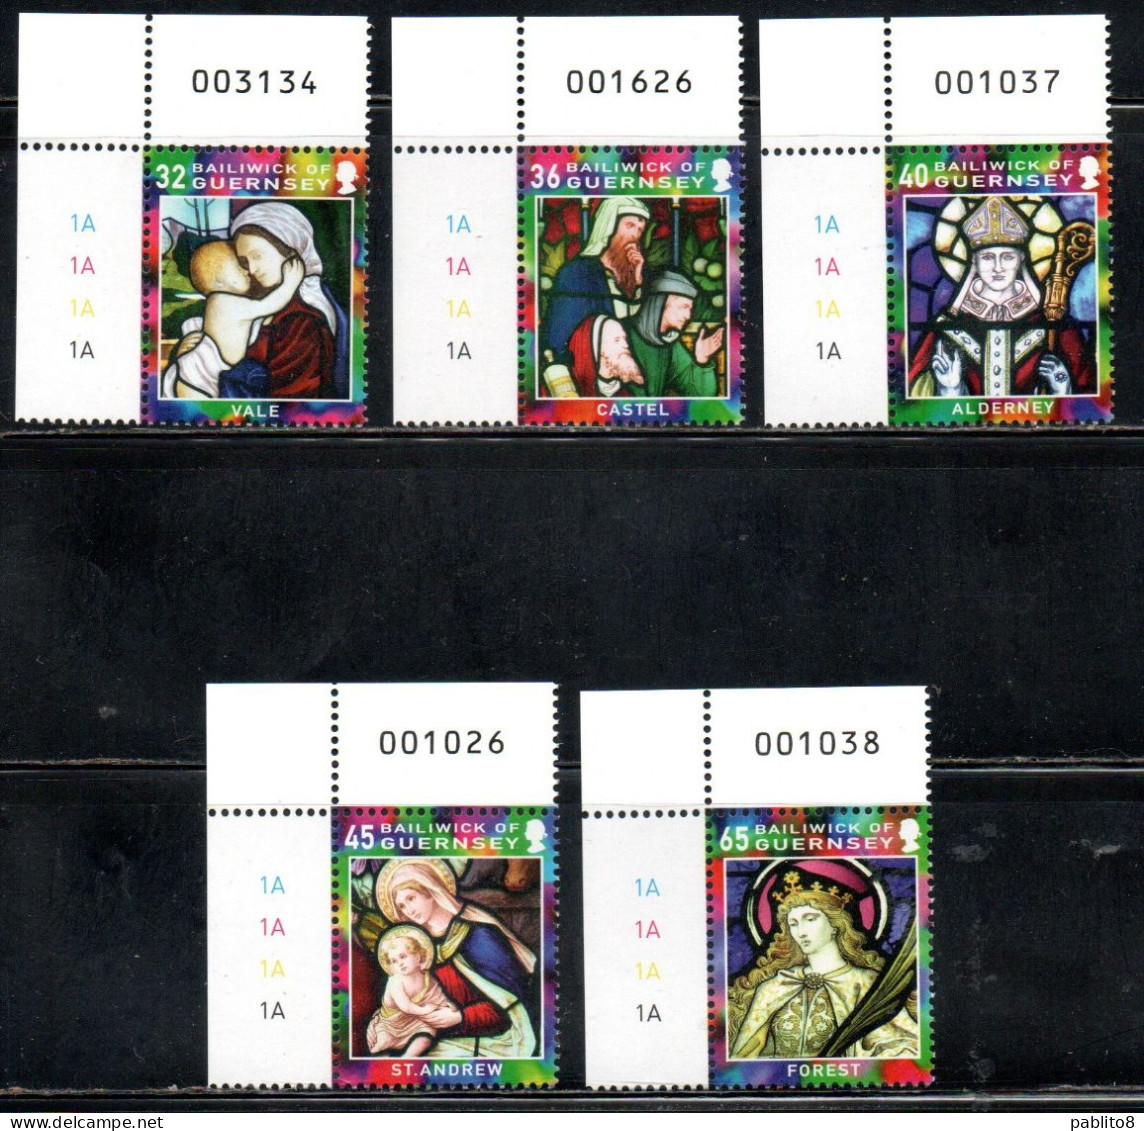 GUERNSEY GUERNESEY 2005 CHRISTMAS NATALE NOEL WEIHNACHTEN NAVIDAD NATAL COMPLETE SET SERIE COMPLETA MNH - Guernesey